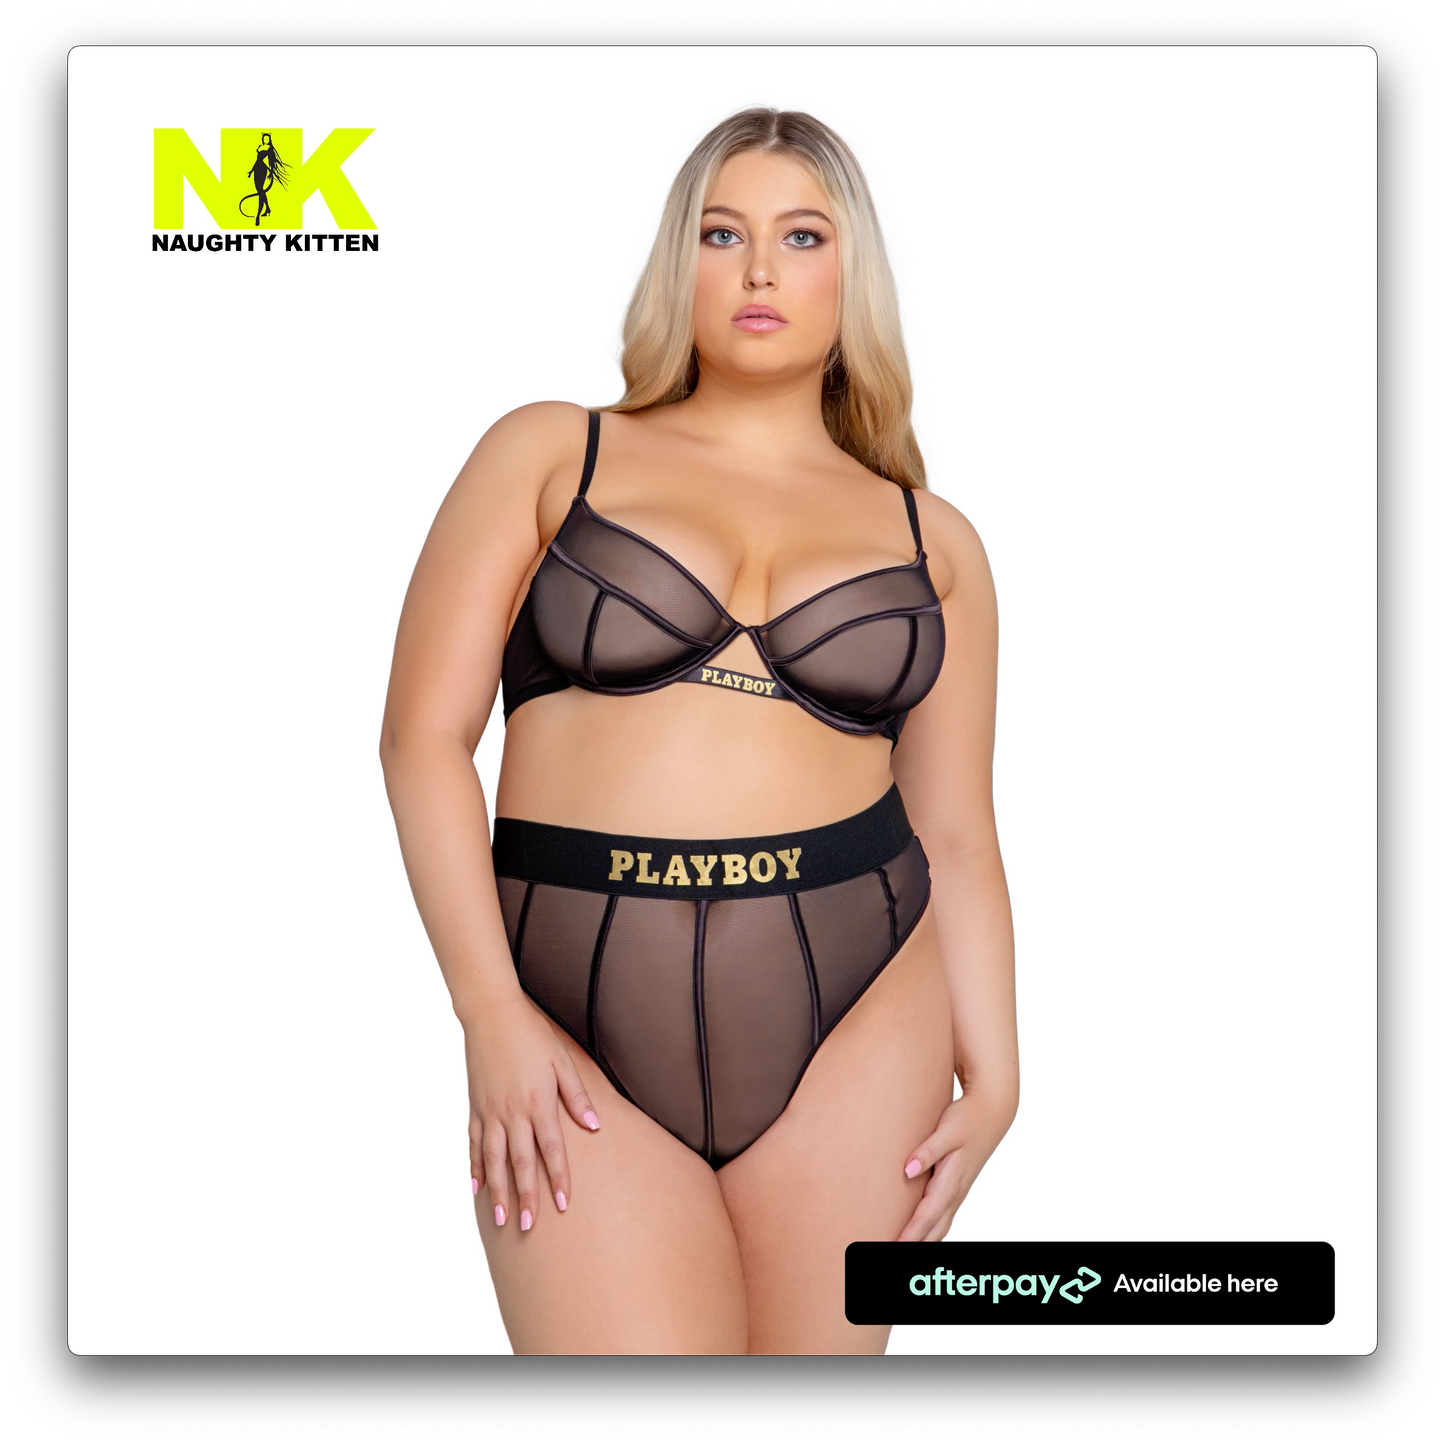 Naughty Kitten Clothing Playboy Cage 2-Piece Set - Black Front View Playboy Plus Size Lingerie